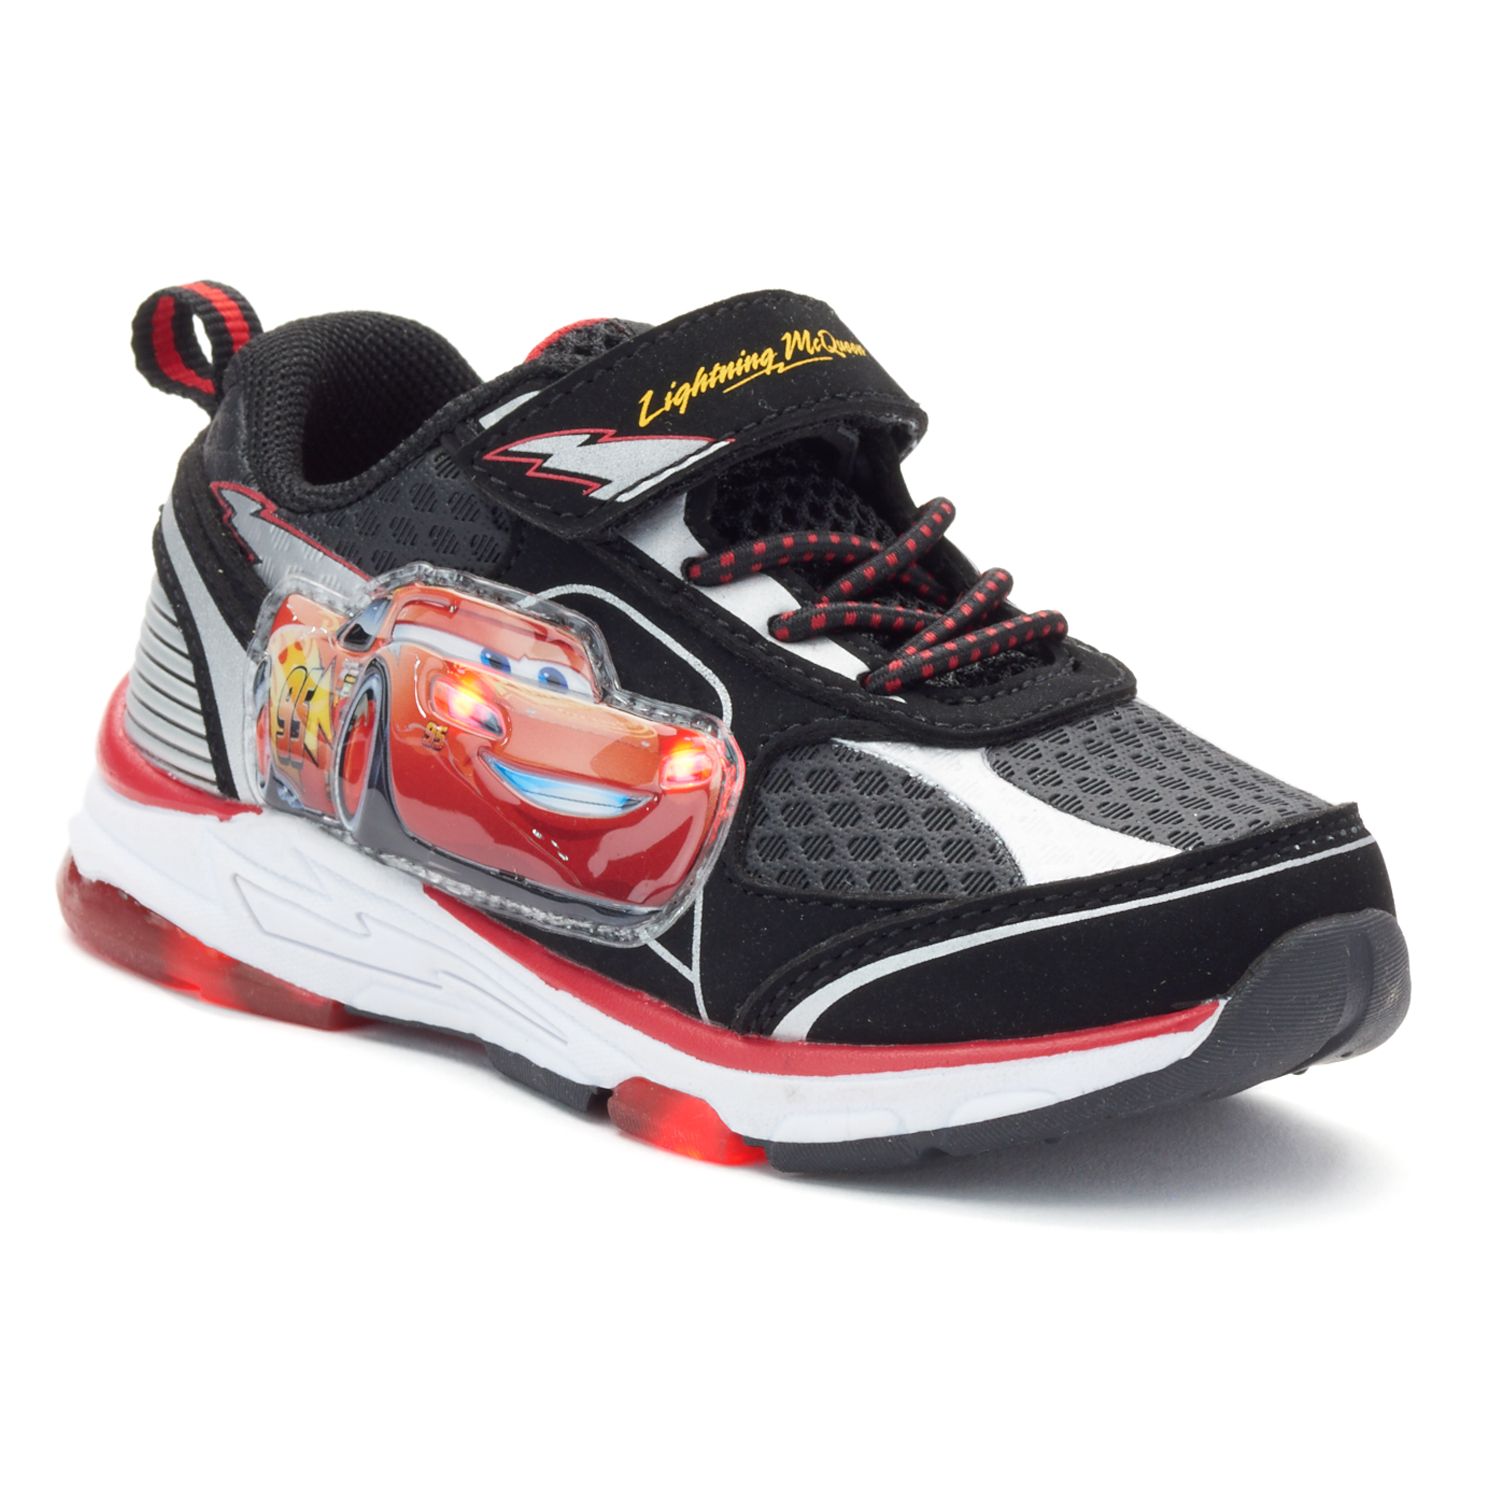 cars mcqueen shoes